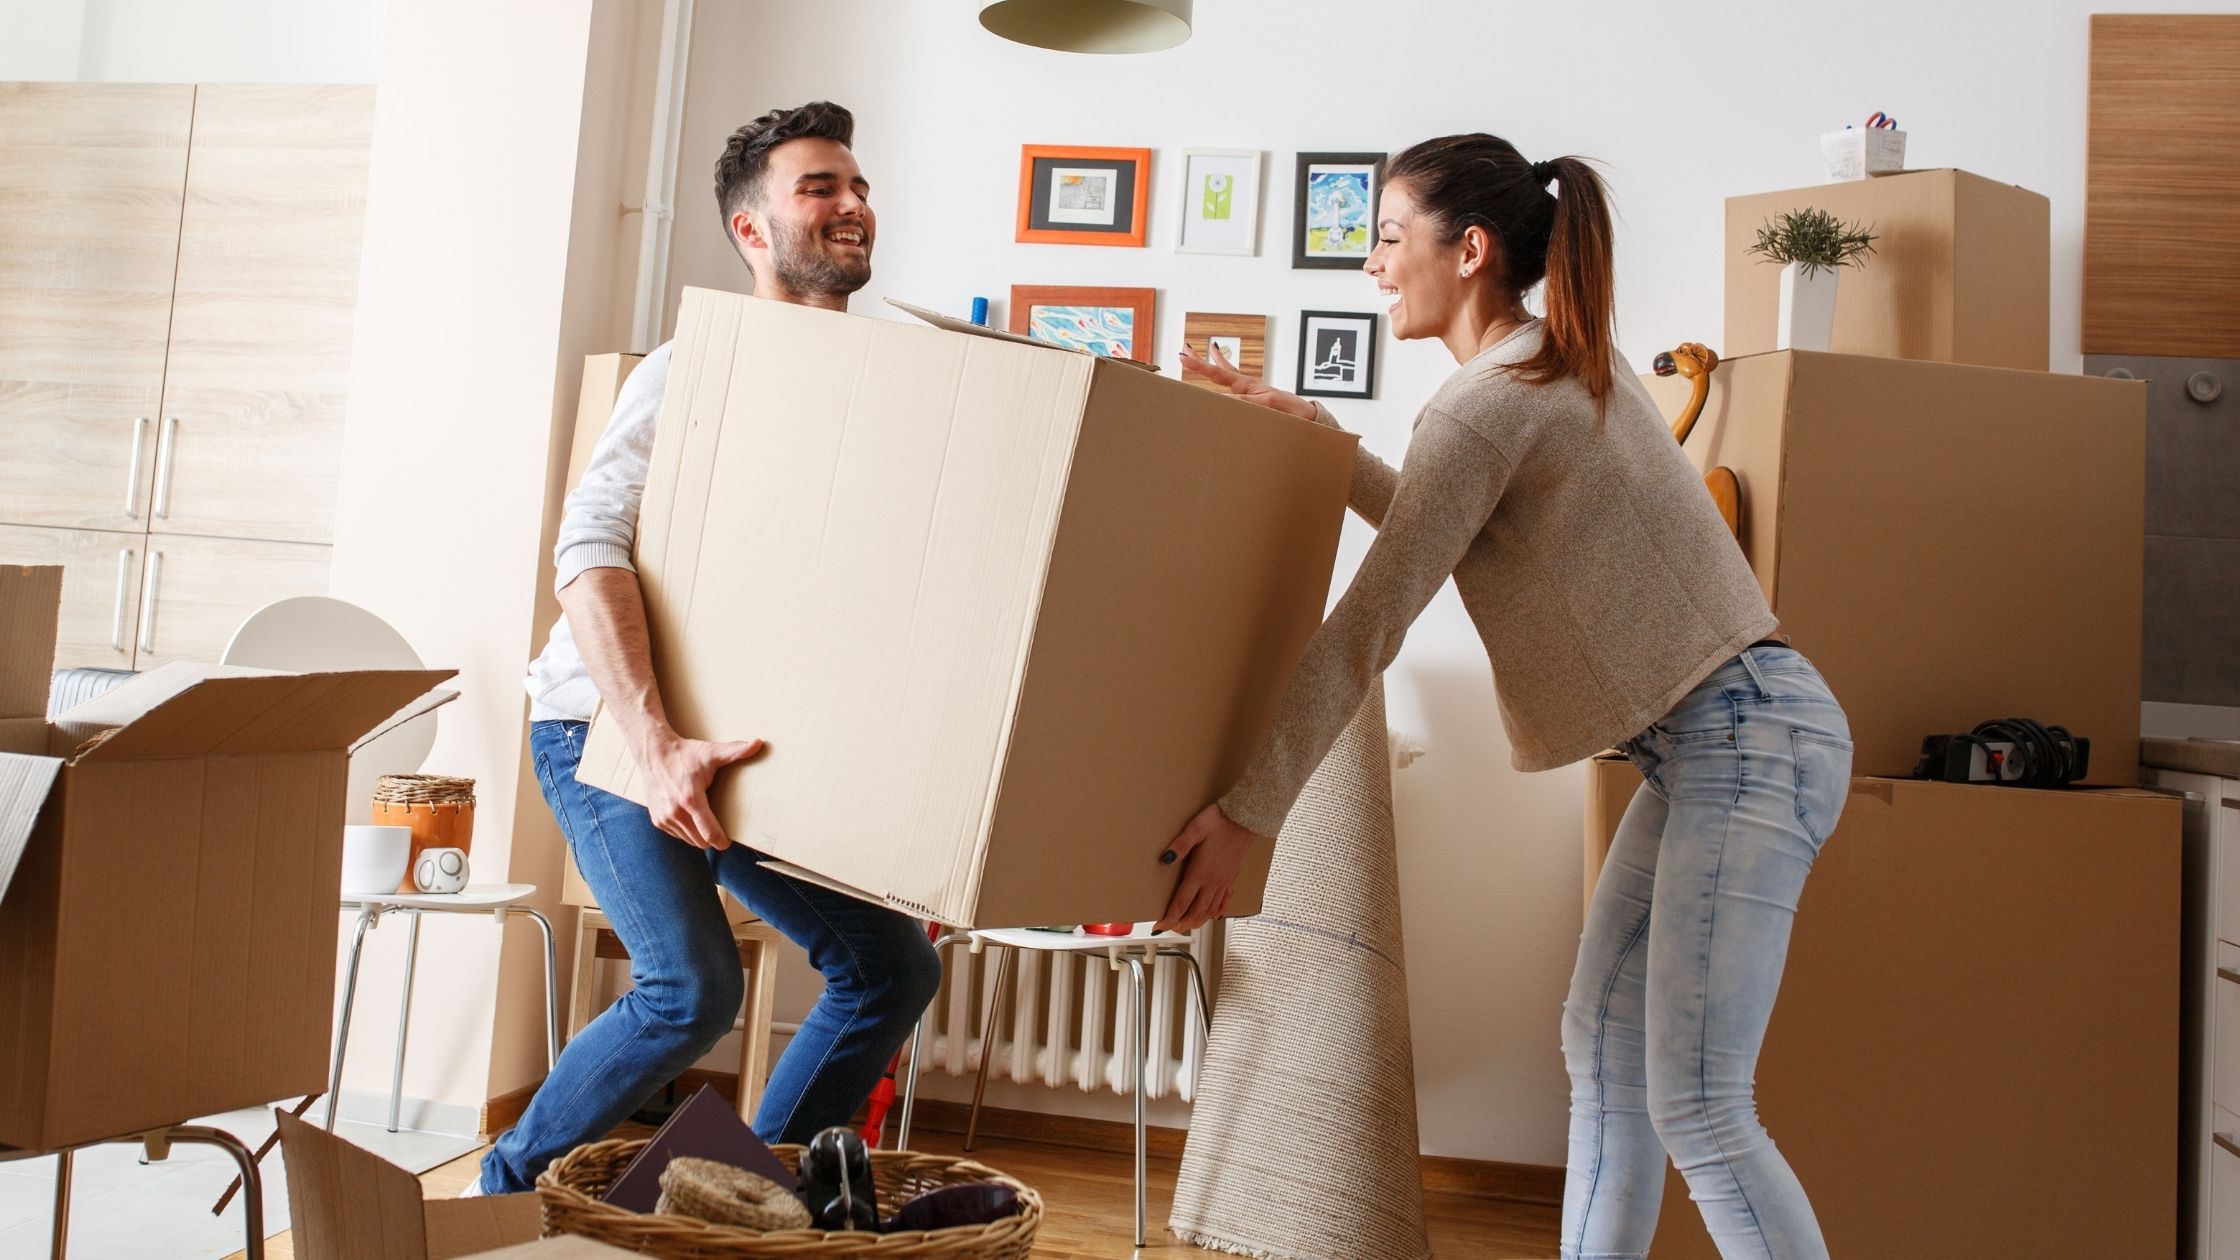 packers & movers service